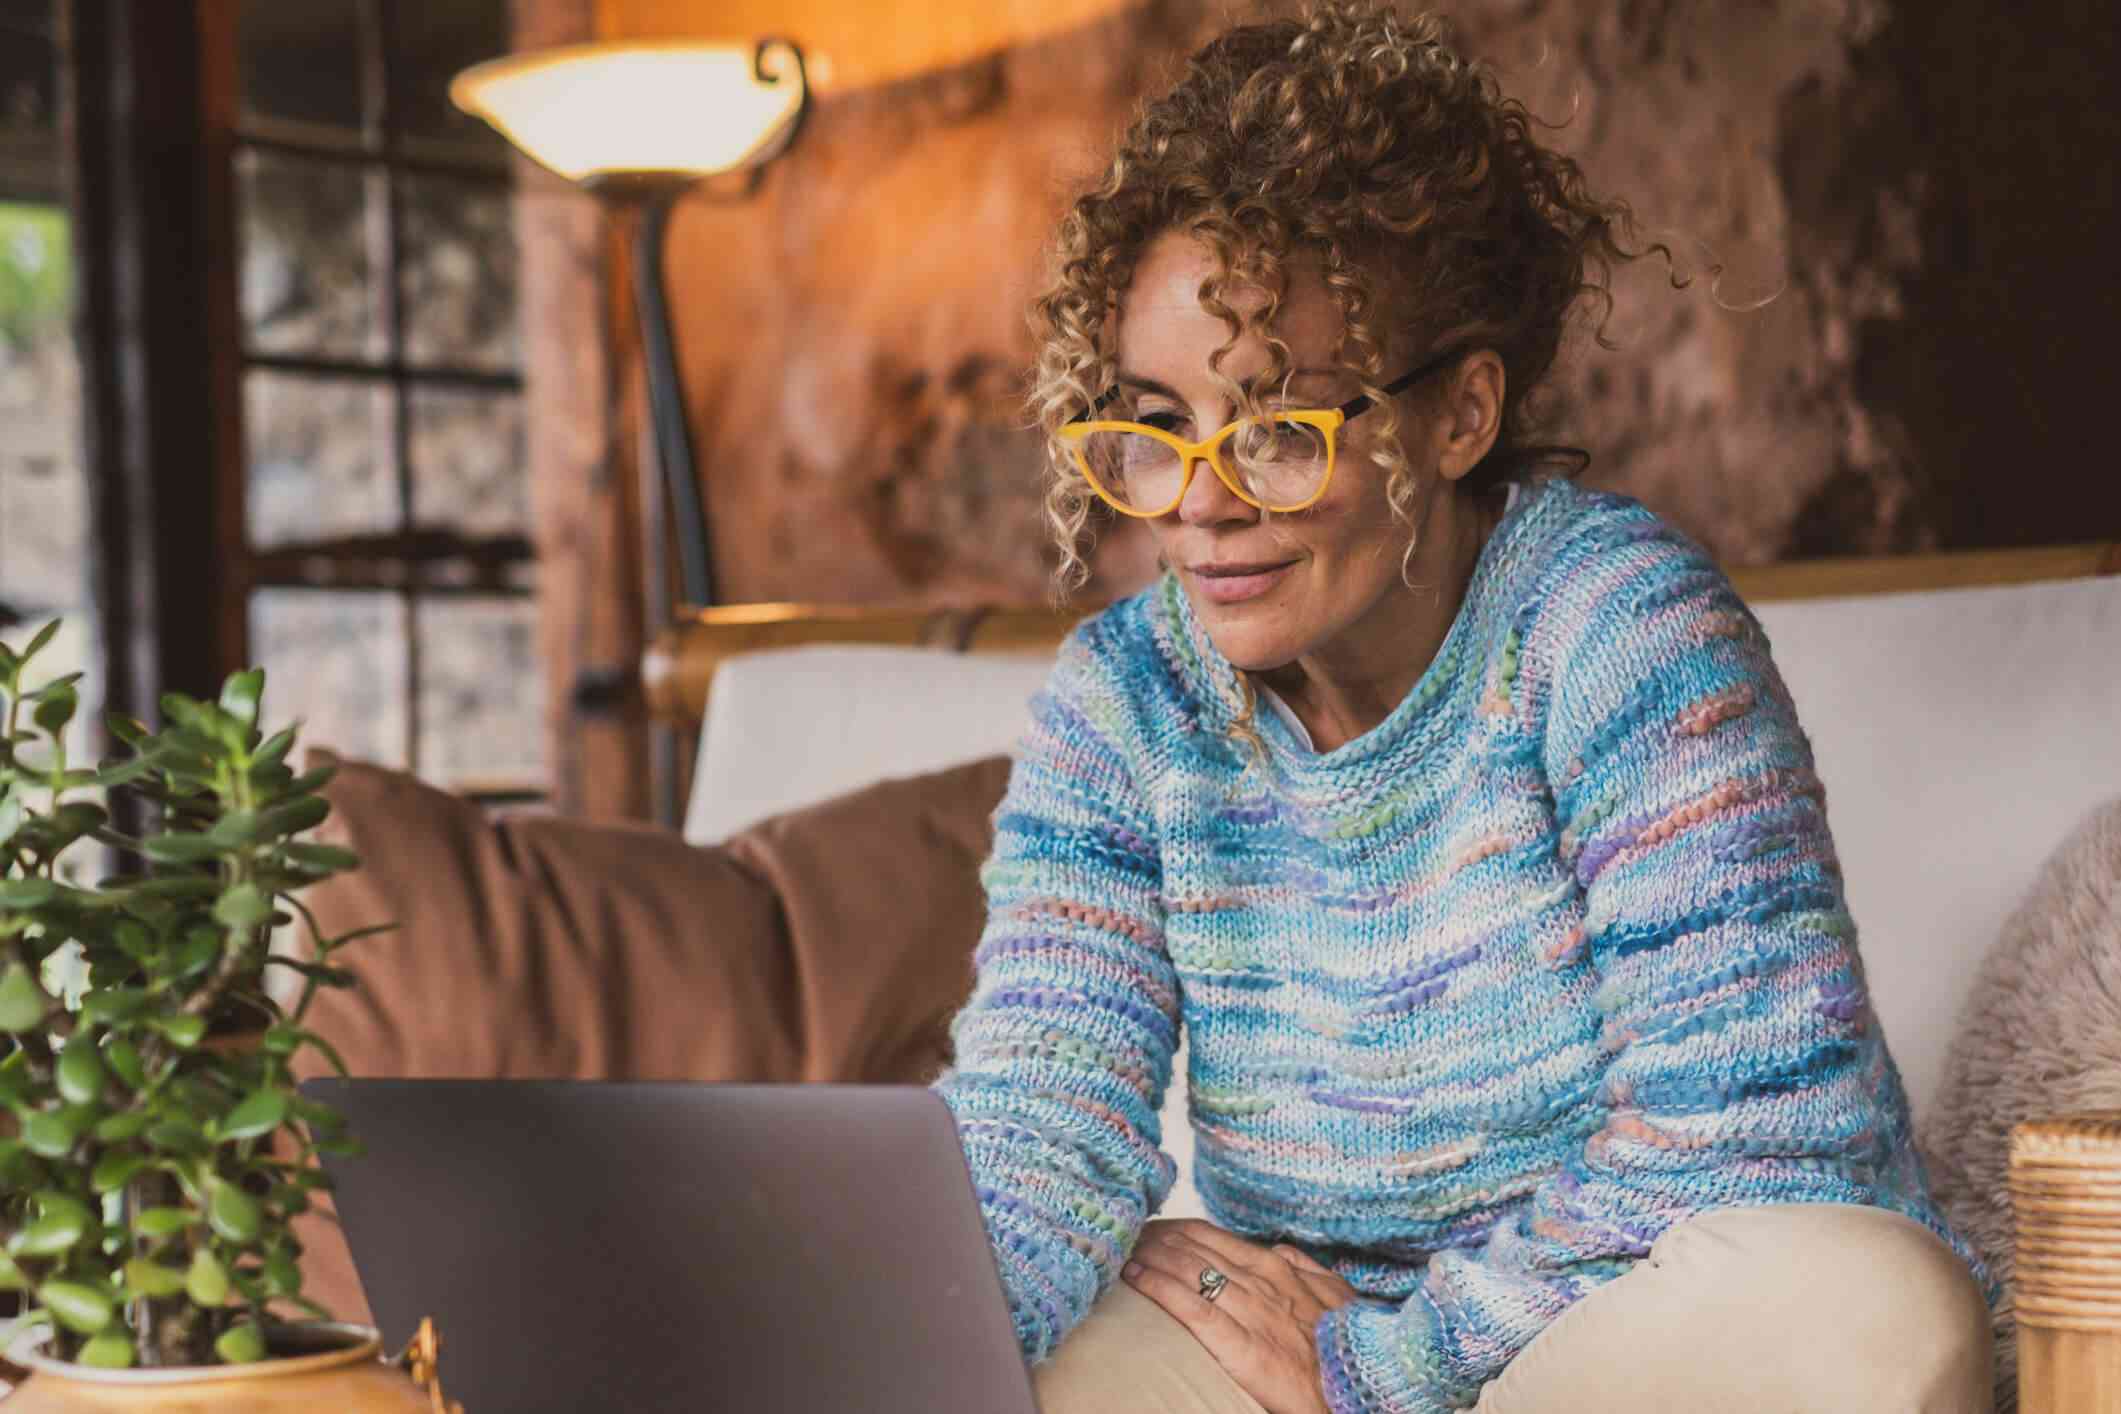 A woman wearing glasses and a colorful sweater sits hunched over on the couch while she looks at the laptop that is open on the coffee table infront of her.